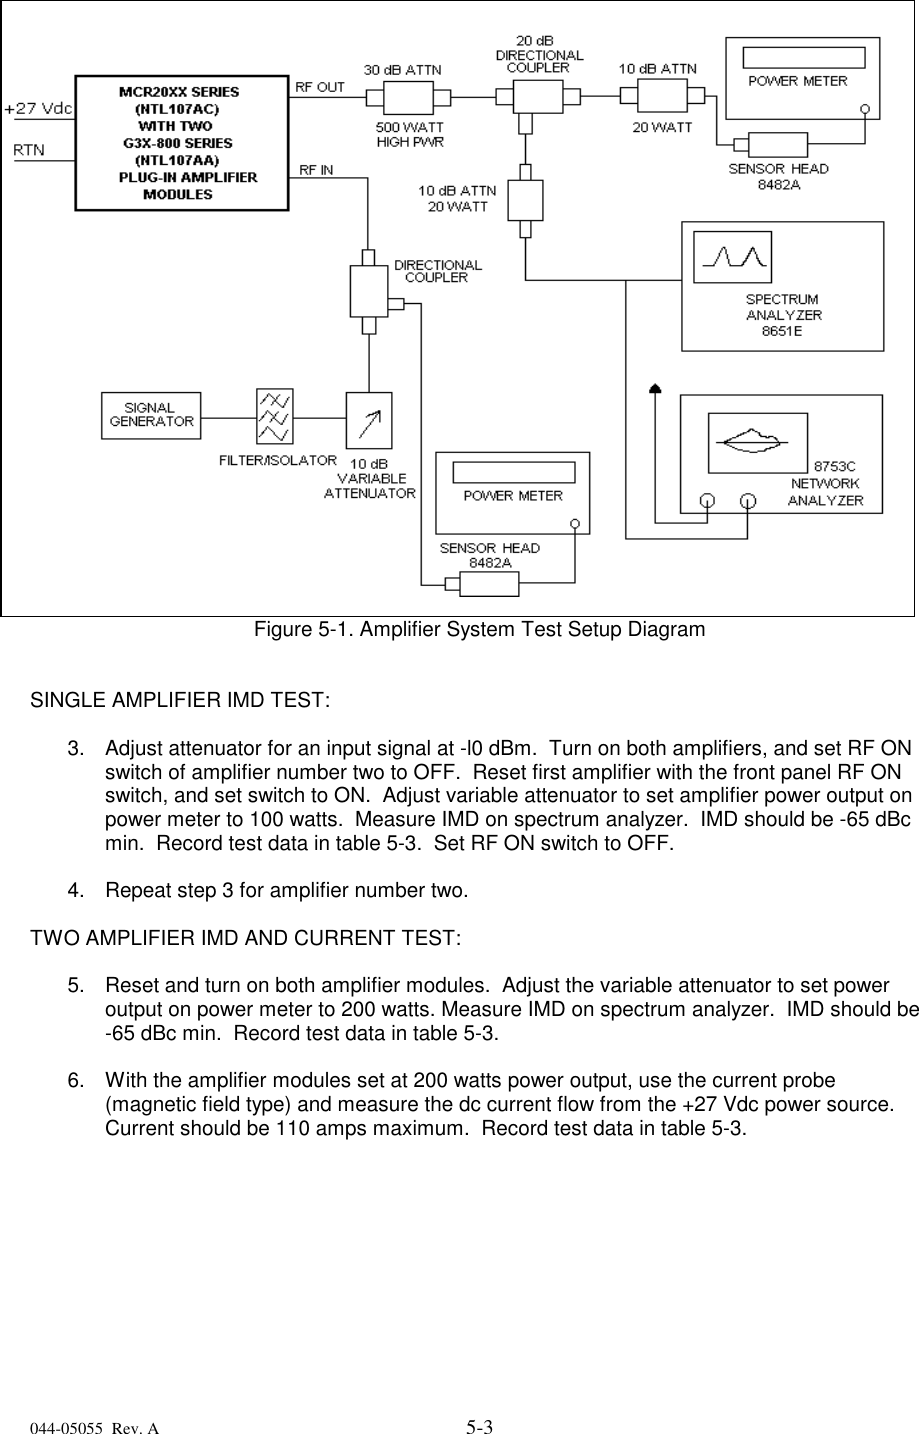 044-05055  Rev. A 5-3Figure 5-1. Amplifier System Test Setup DiagramSINGLE AMPLIFIER IMD TEST:3.  Adjust attenuator for an input signal at -l0 dBm.  Turn on both amplifiers, and set RF ONswitch of amplifier number two to OFF.  Reset first amplifier with the front panel RF ONswitch, and set switch to ON.  Adjust variable attenuator to set amplifier power output onpower meter to 100 watts.  Measure IMD on spectrum analyzer.  IMD should be -65 dBcmin.  Record test data in table 5-3.  Set RF ON switch to OFF. 4.  Repeat step 3 for amplifier number two. TWO AMPLIFIER IMD AND CURRENT TEST: 5.  Reset and turn on both amplifier modules.  Adjust the variable attenuator to set poweroutput on power meter to 200 watts. Measure IMD on spectrum analyzer.  IMD should be-65 dBc min.  Record test data in table 5-3. 6.  With the amplifier modules set at 200 watts power output, use the current probe(magnetic field type) and measure the dc current flow from the +27 Vdc power source.Current should be 110 amps maximum.  Record test data in table 5-3. 